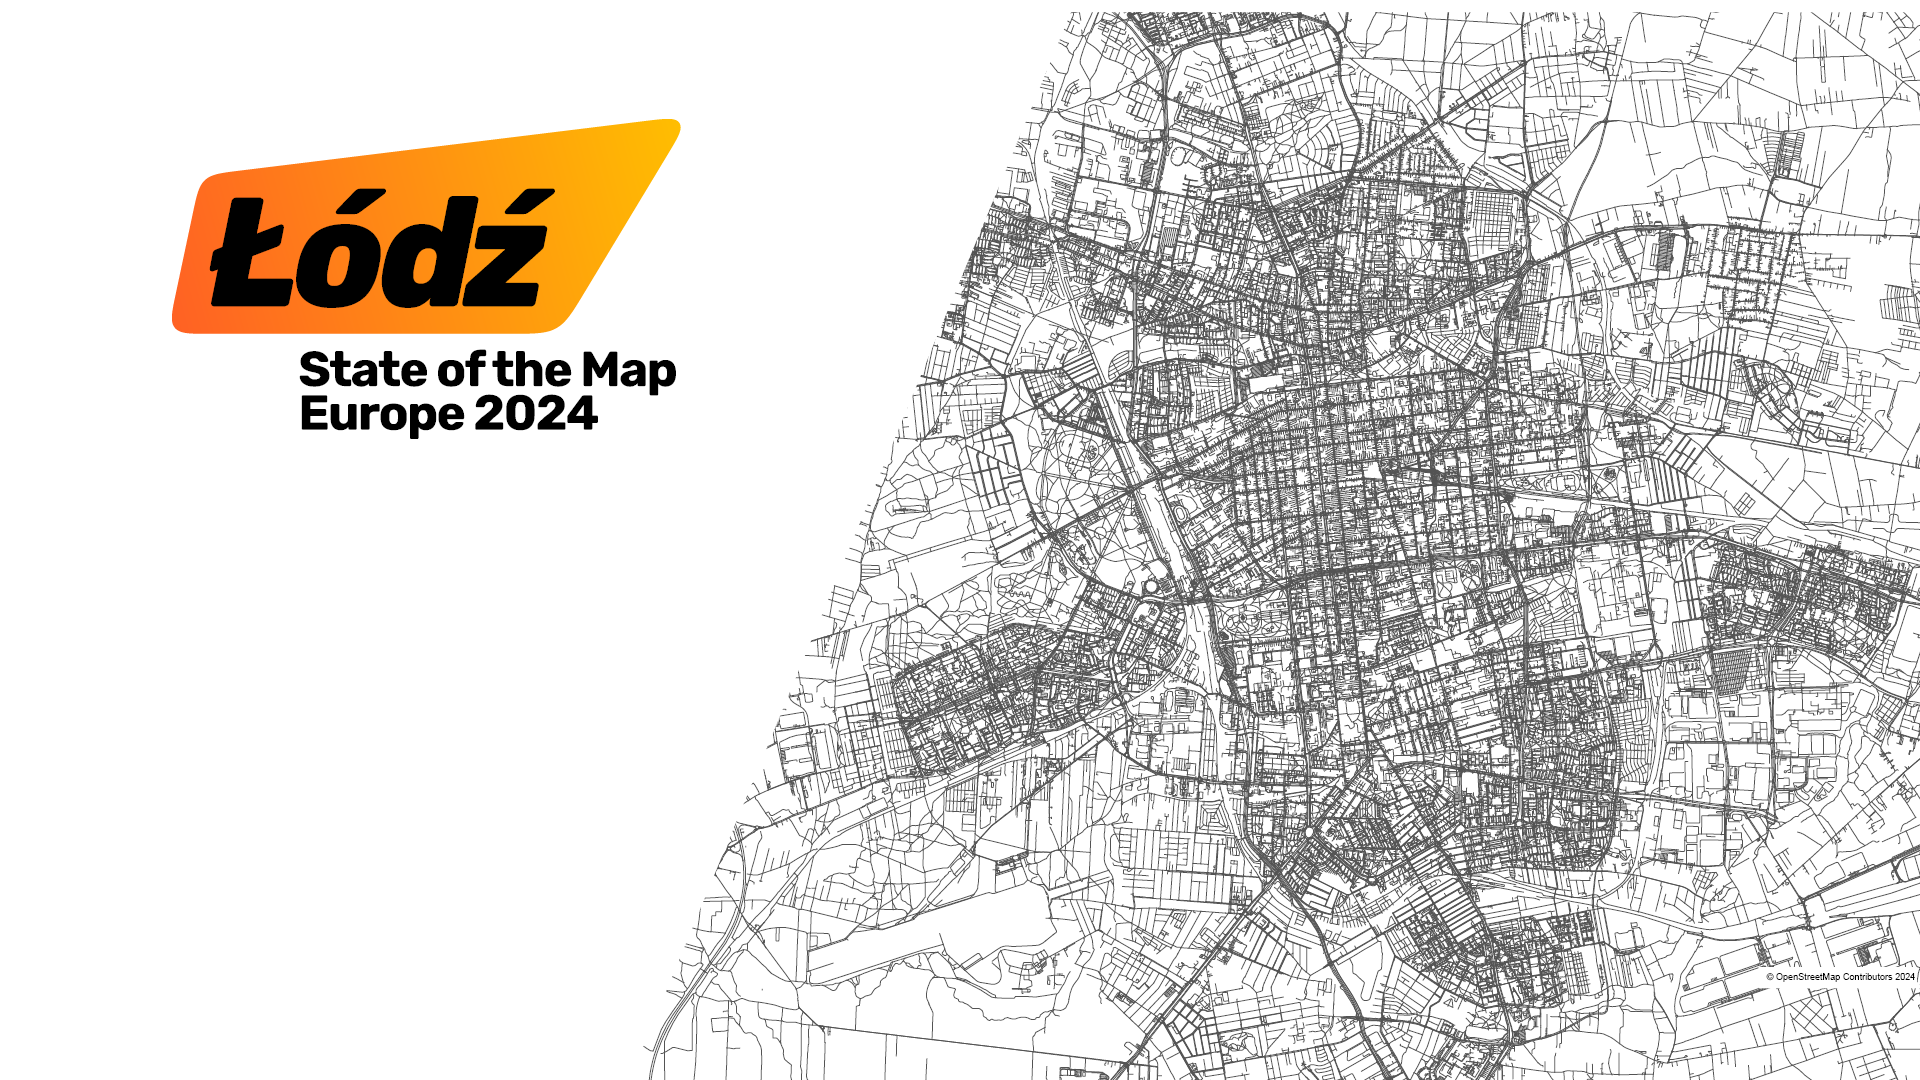 Our Contribution to the State of the Map Europe 2024 Conference in Łódź